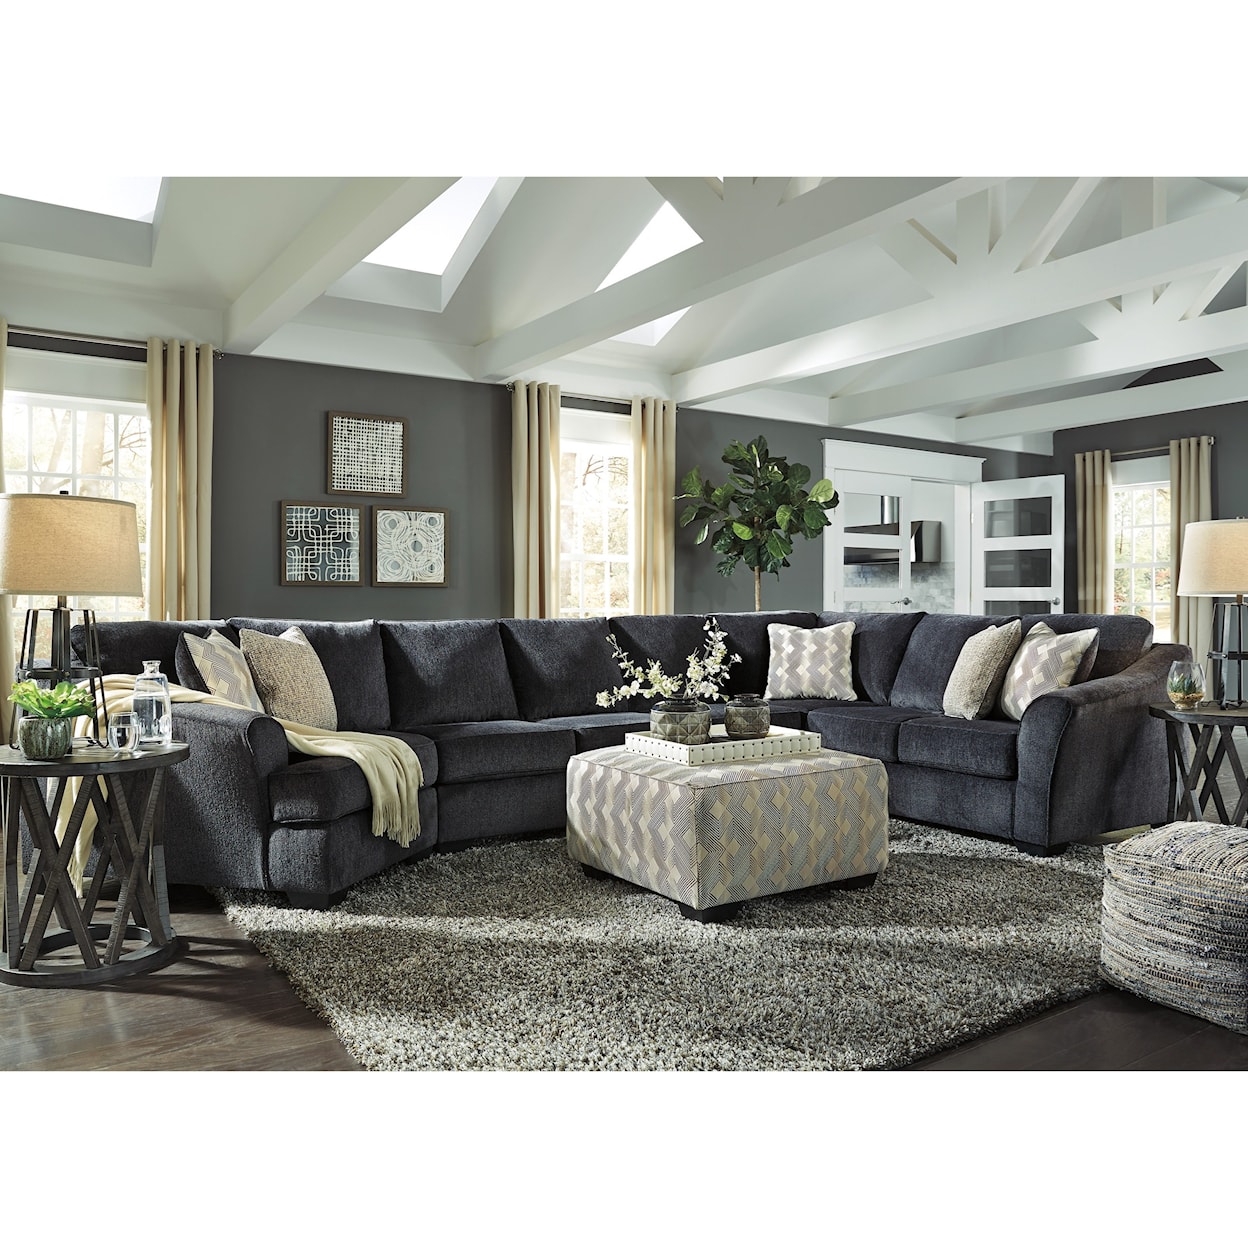 Signature Design by Ashley Eltmann 4pc Sectional and ottoman